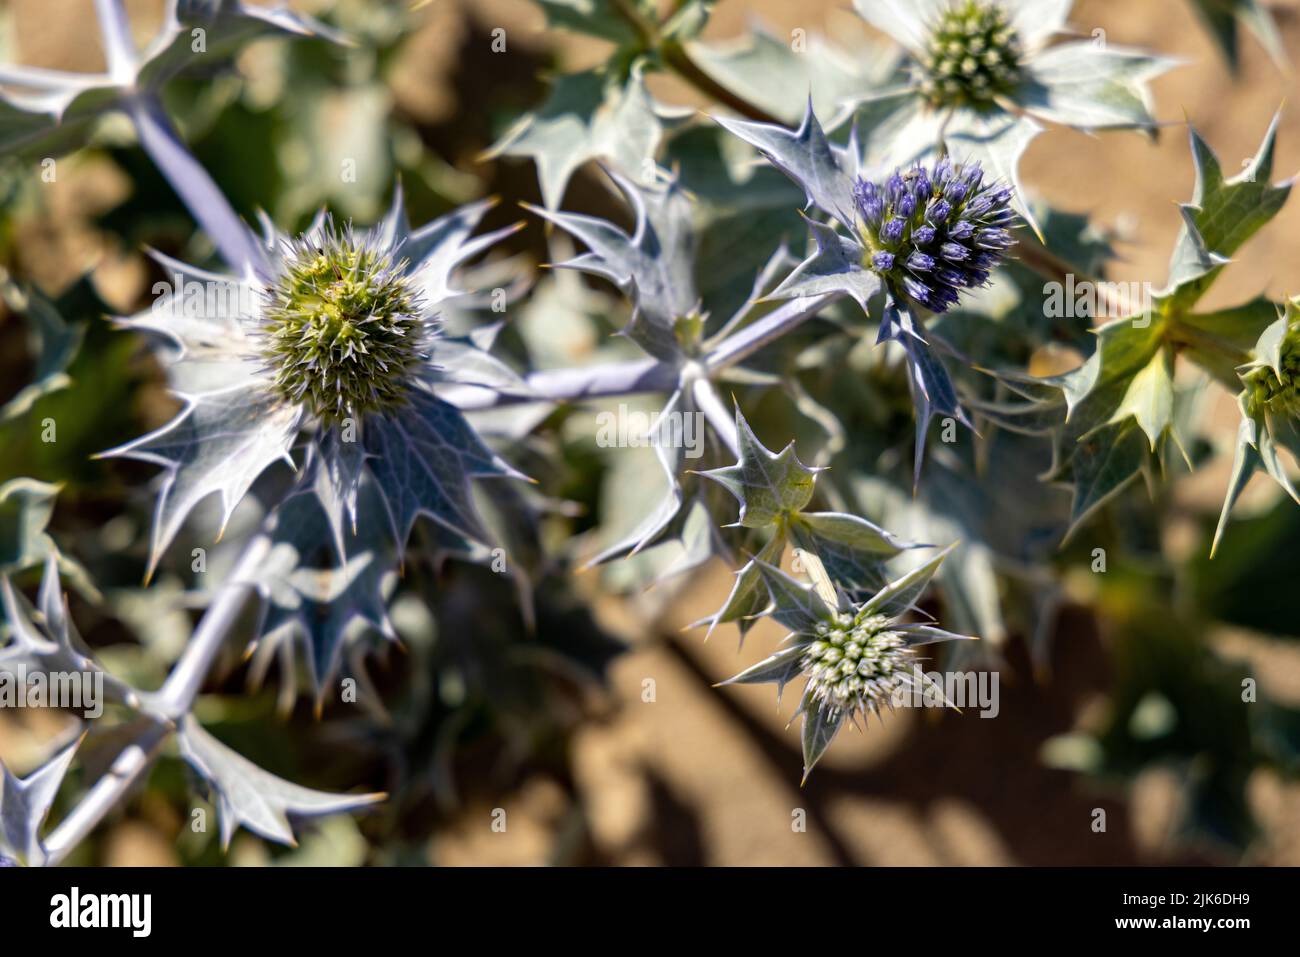 Close-up of Eryngium maritimum, sea holly or seaside eryngo, growing in the dunes along the North Sea coast, Katwijk, South Holland, The Netherlands. Stock Photo